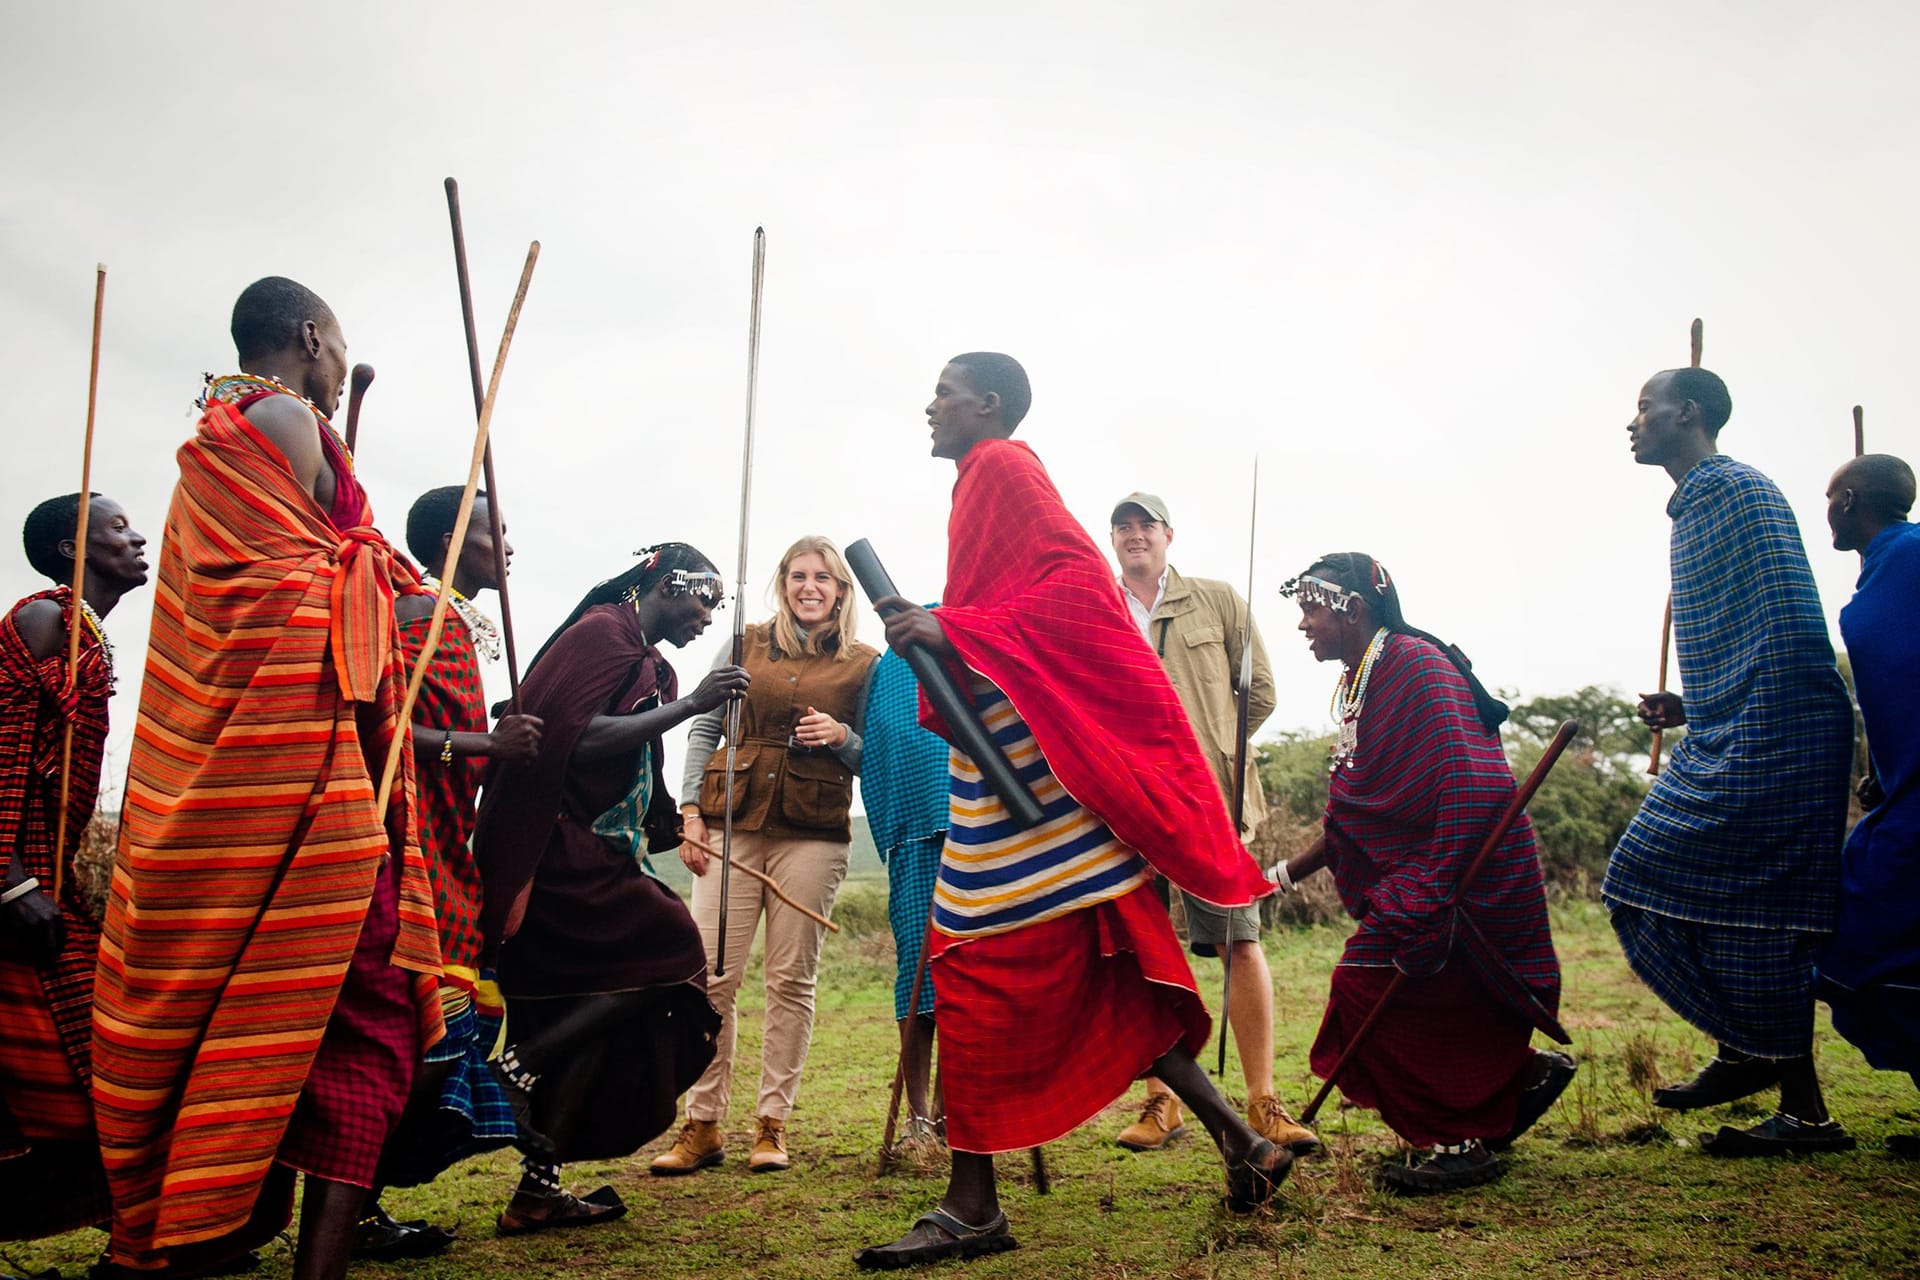 A maasai of East Africa experience